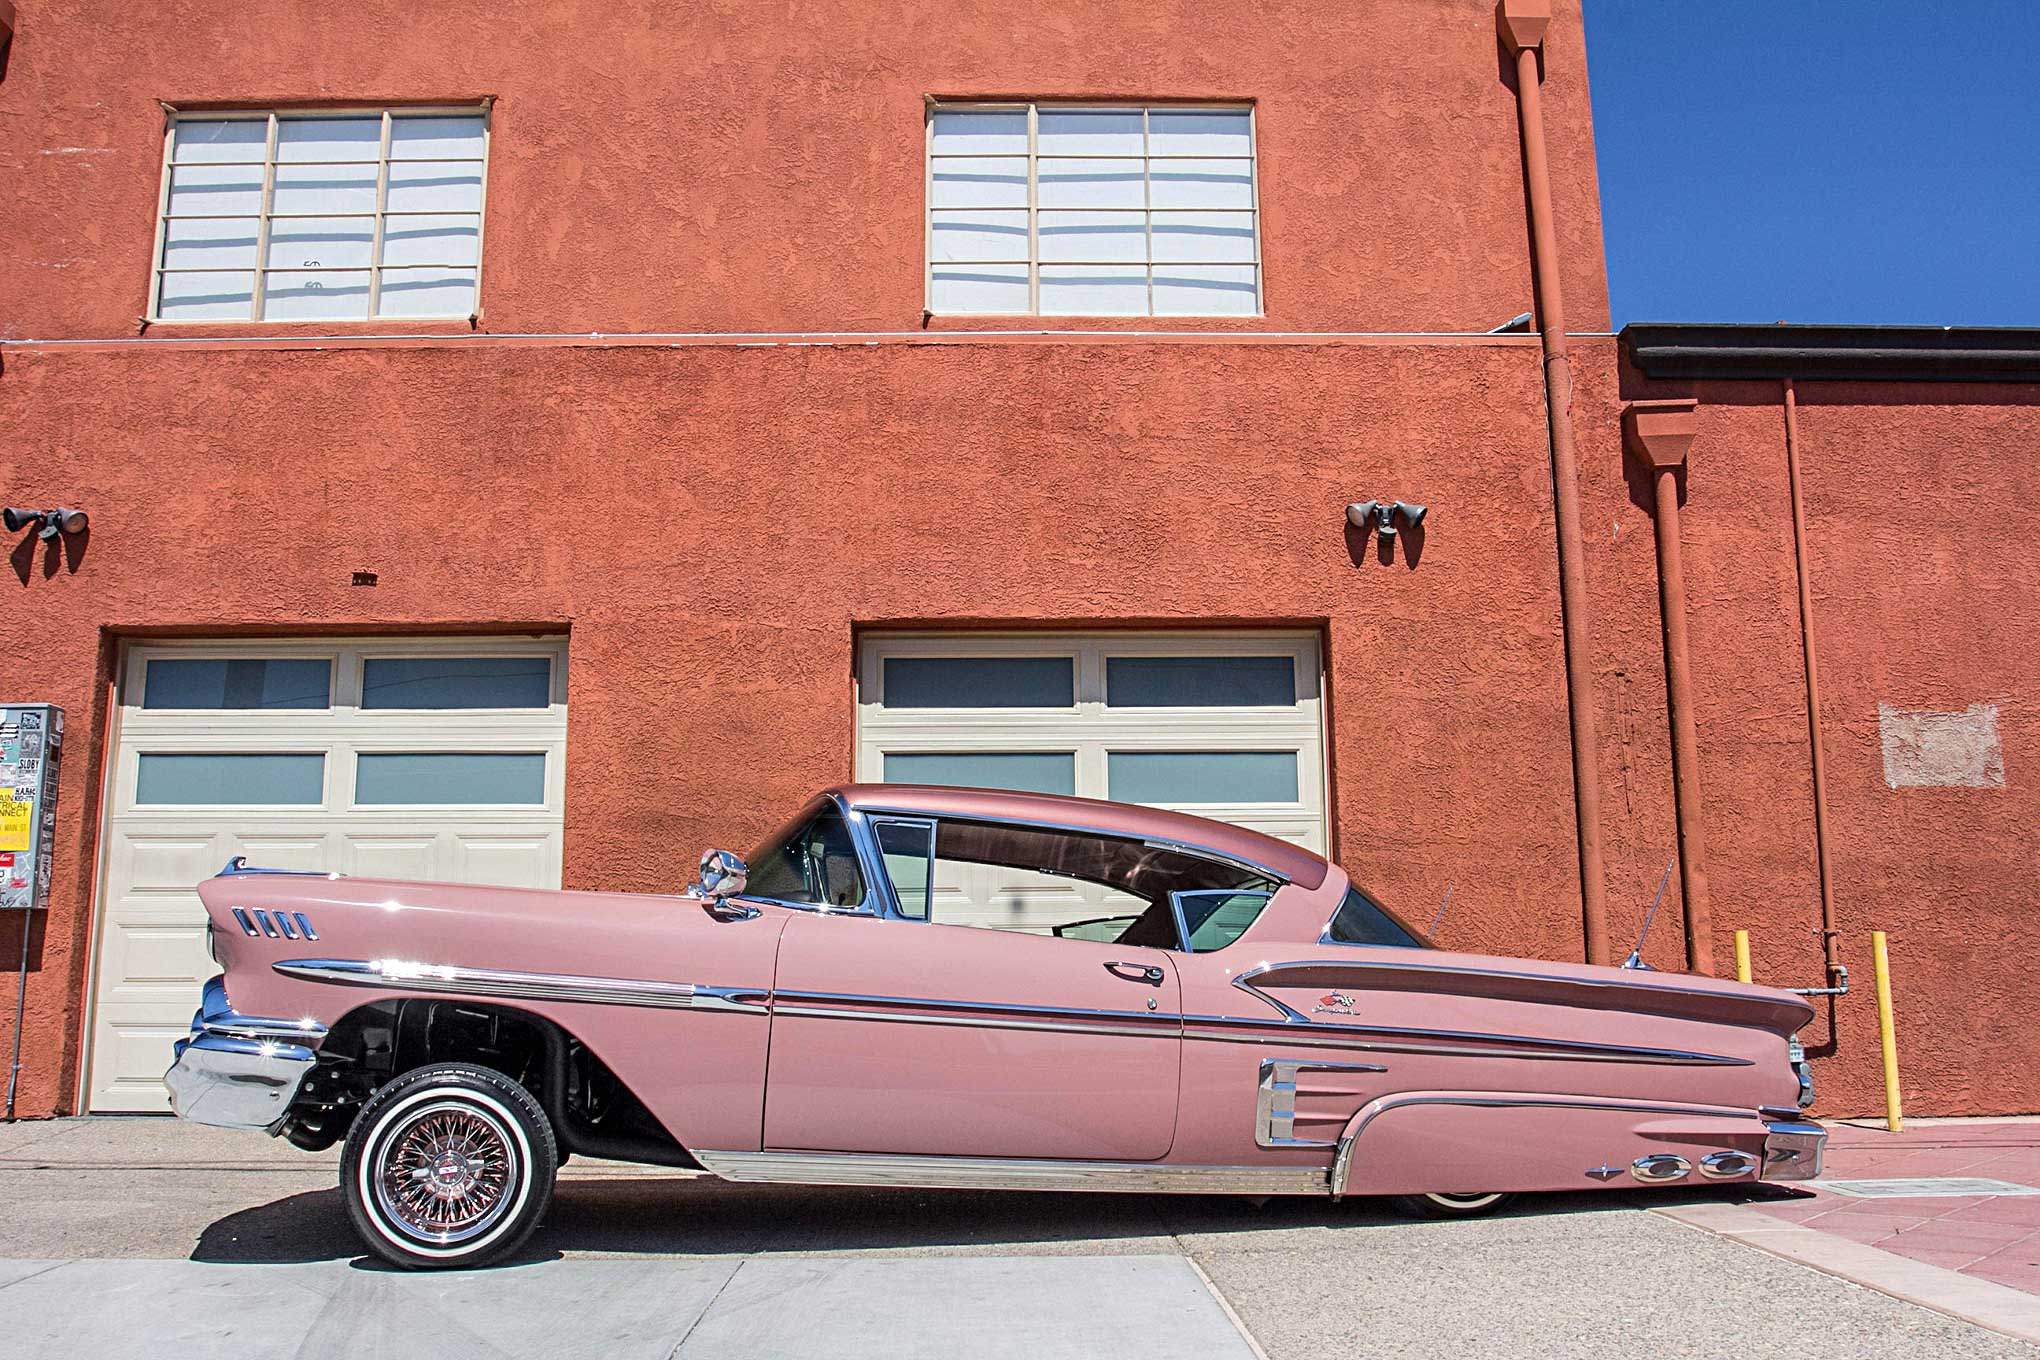 1958 Chevrolet Impala Lowrider Muscle Car Pink Car 2040x1360